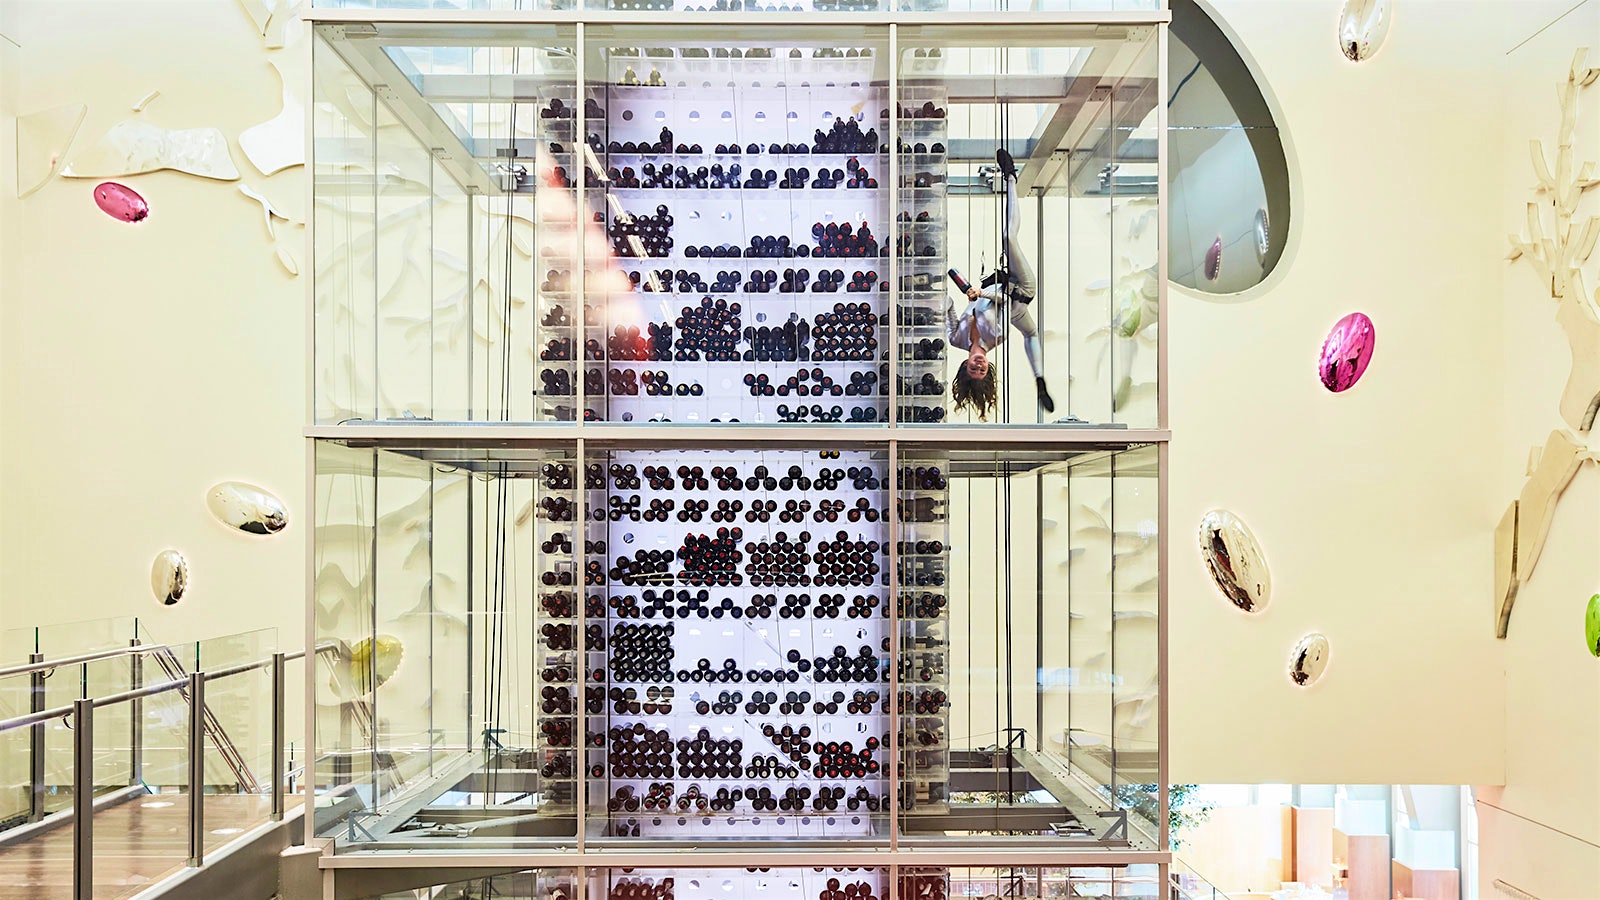  A glass display of the wines at Aureole, with an acrobat retrieving a bottle from a high shelf